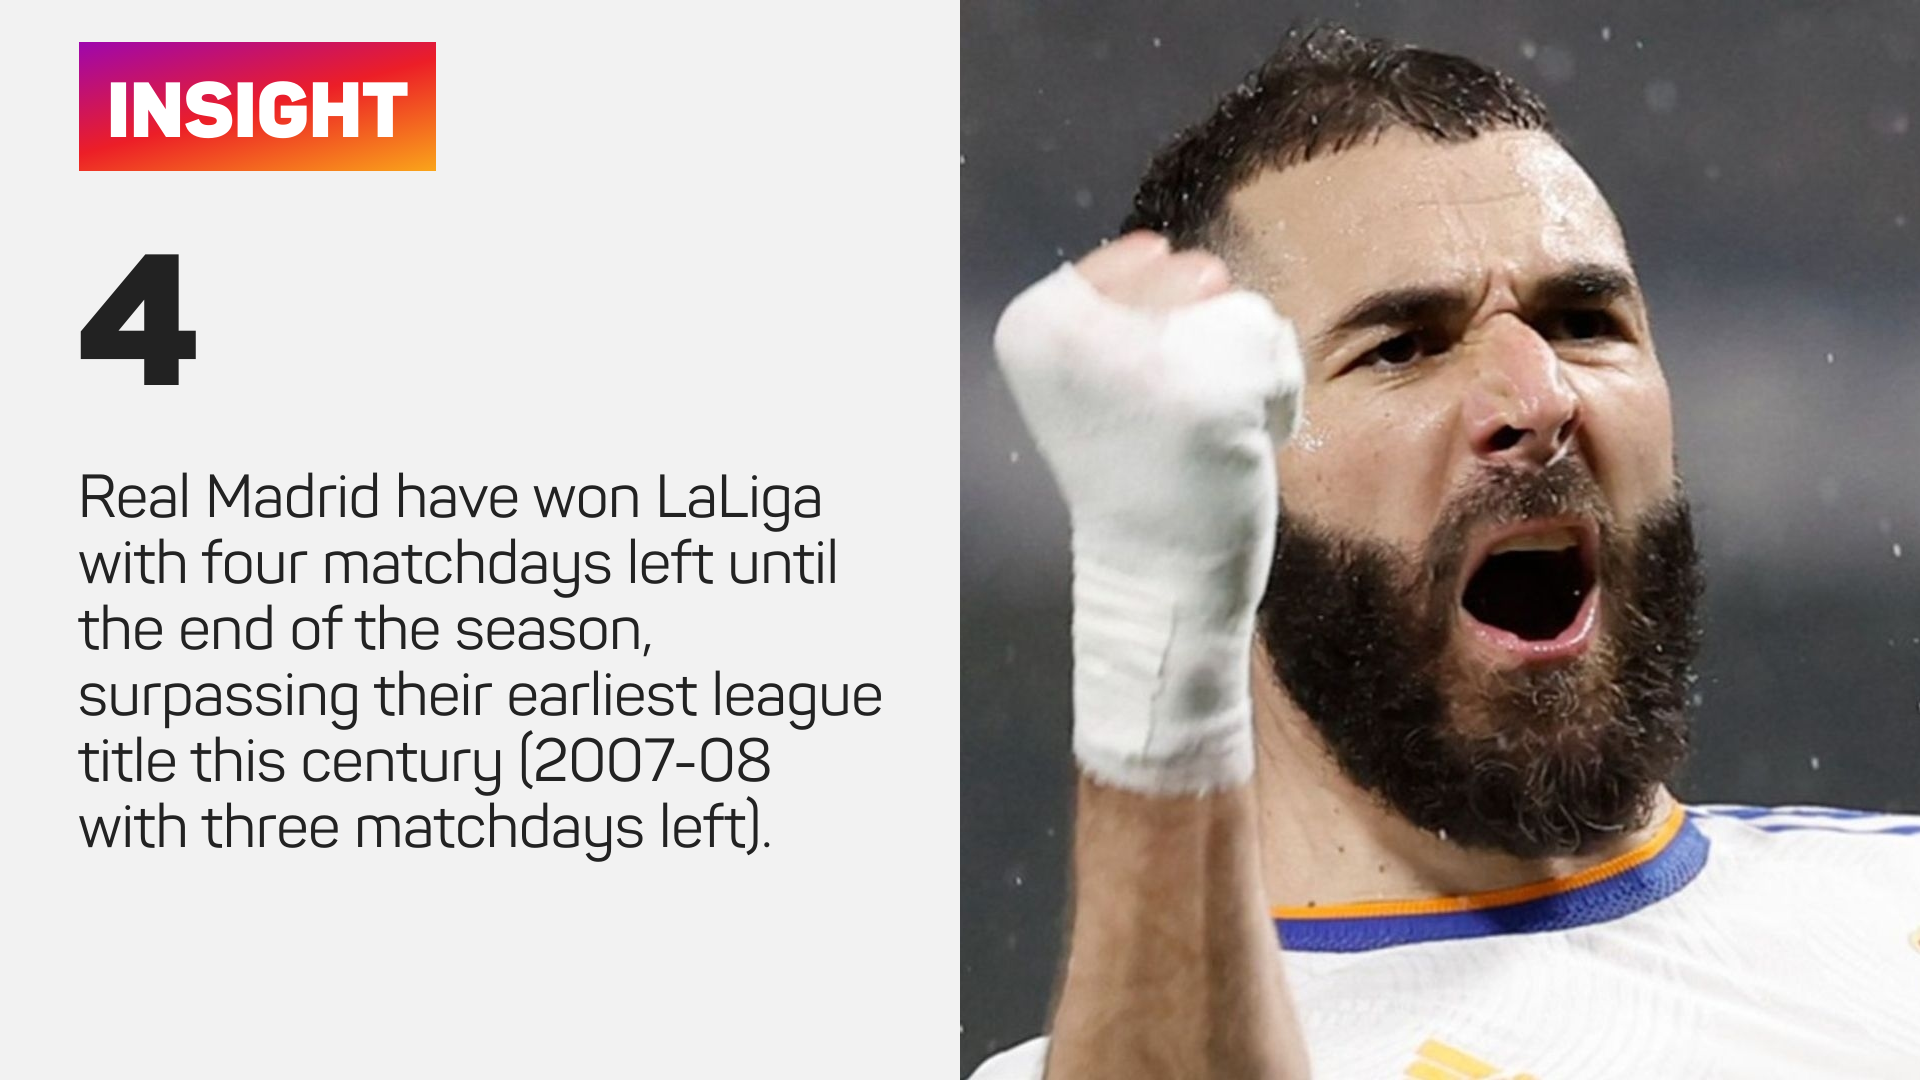 Real Madrid have won LaLiga with four matchdays left